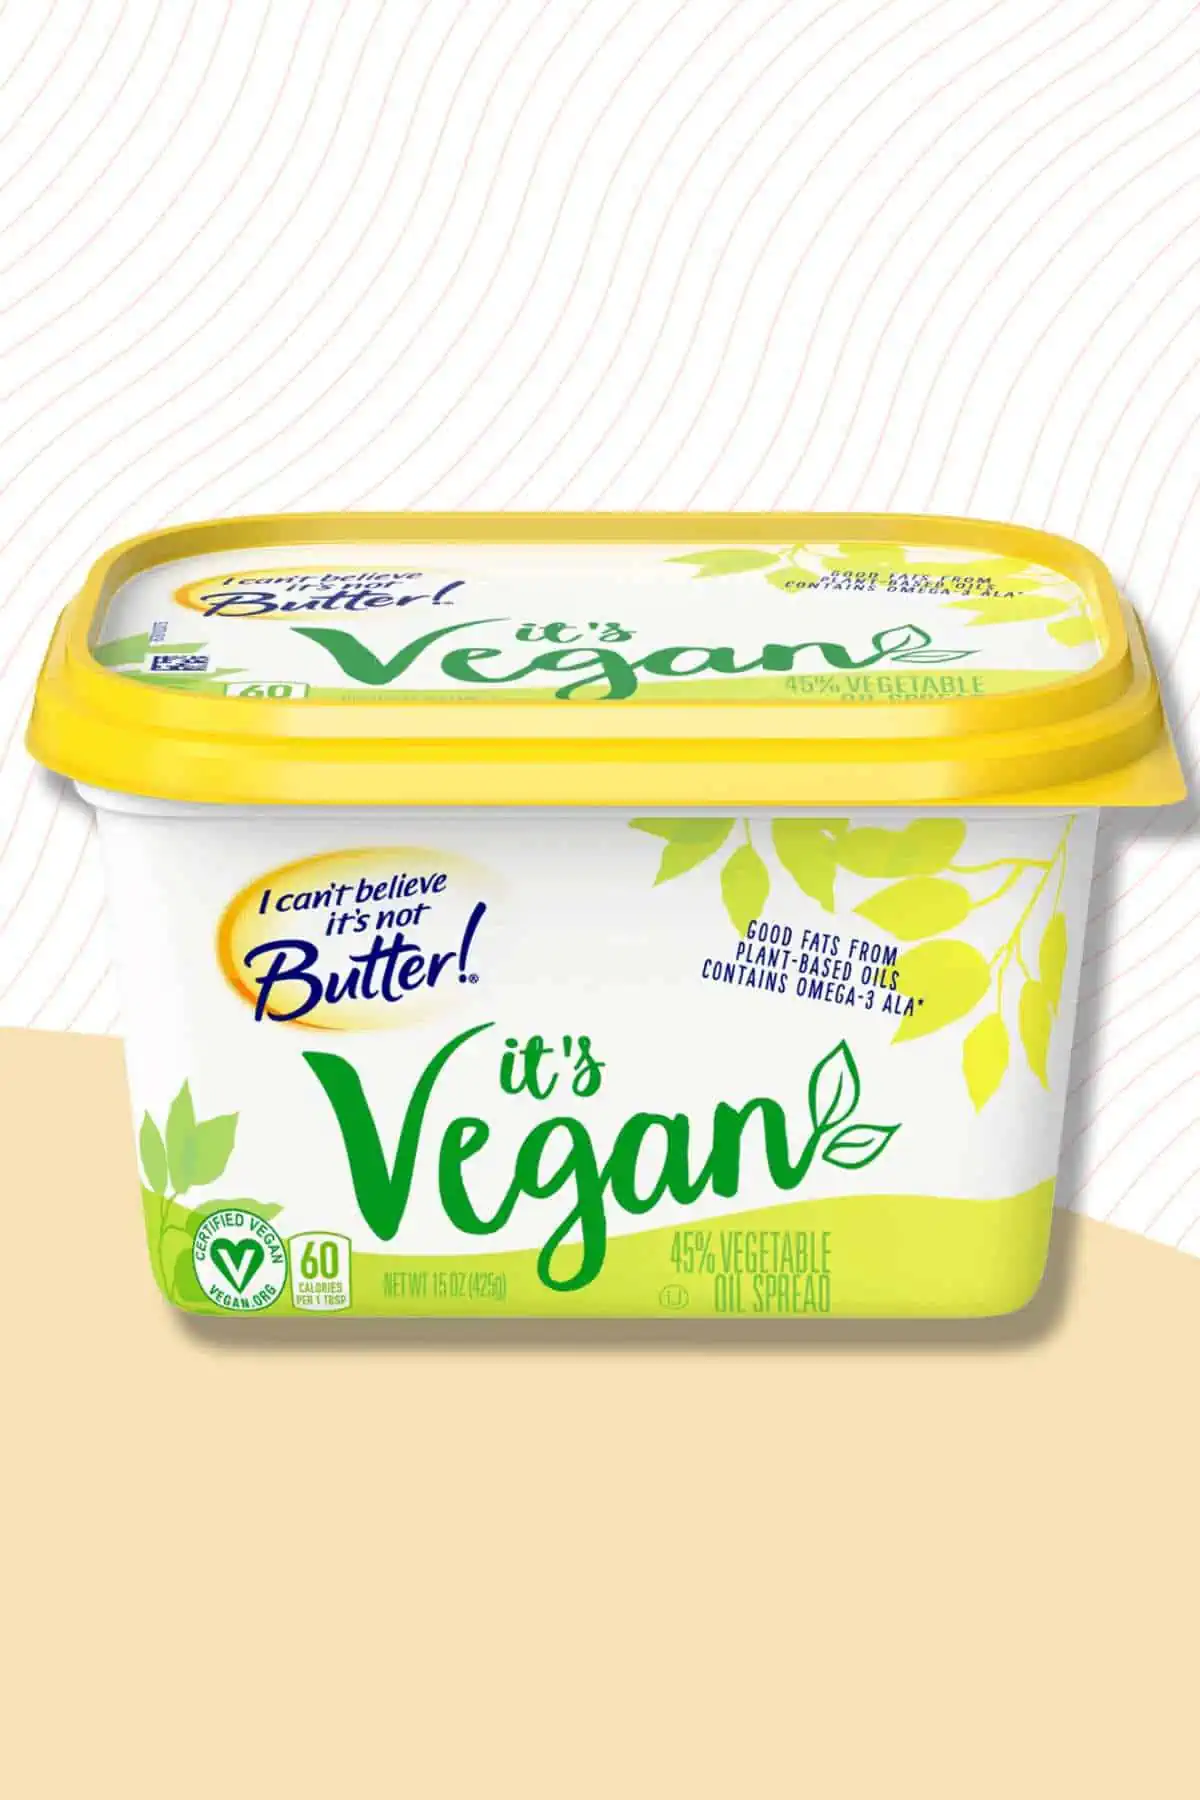 The front-facing packaging of the brand I Can't Believe it's Not Butter vegan butter!